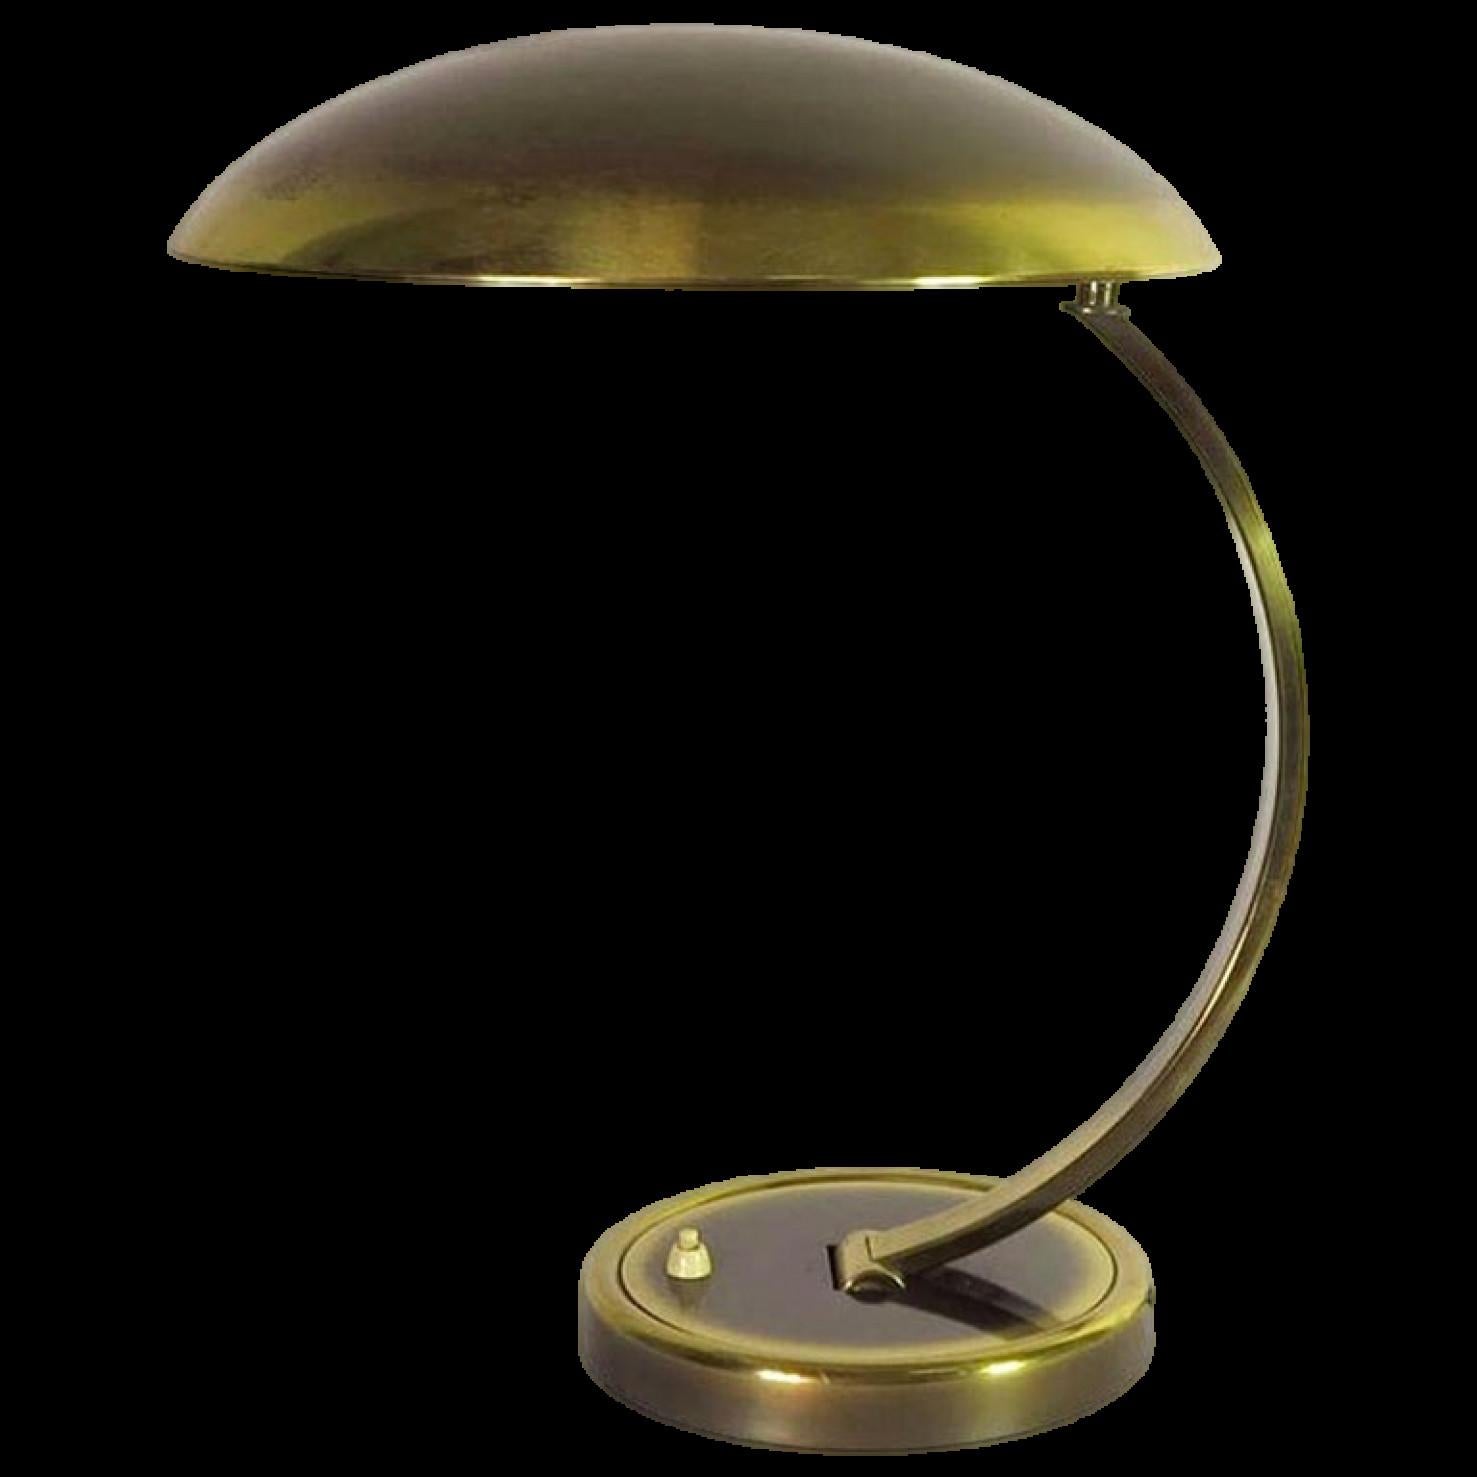 This beautiful patinated brass table lamp was designed by Christian Dell and was produced by Kaiser Idell in the 1950s. Both arm and shade are adjustable.

Industrial designer, silversmith, and teacher Christian Dell was born in 1893 in Offenbach,